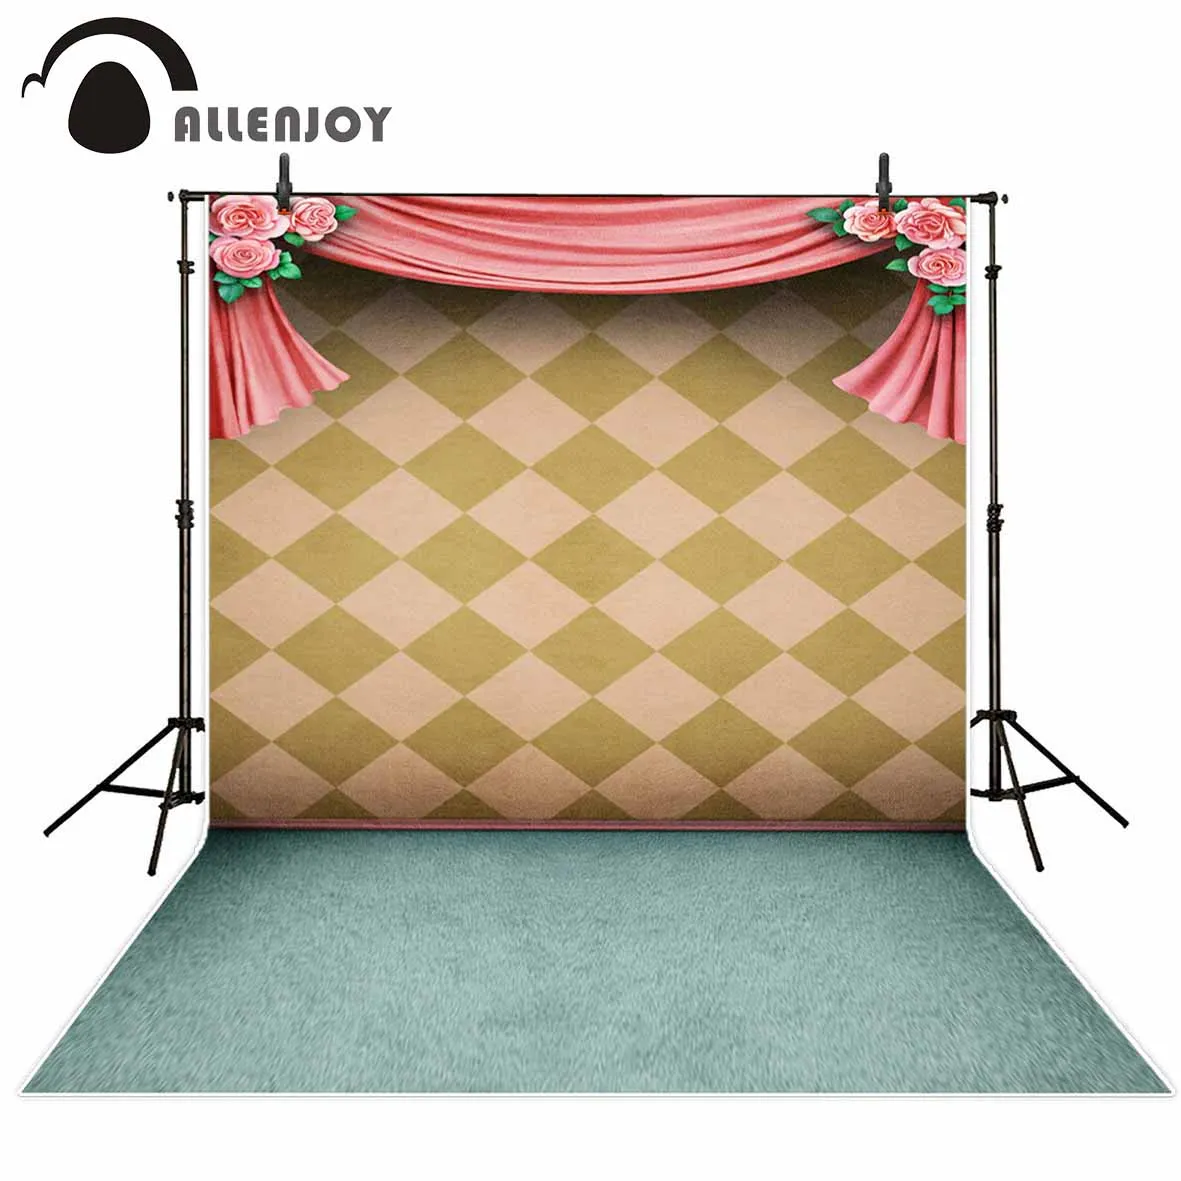 

Allenjoy new arrival photographic background Lattice green flower curtain cloth dolls backdrop photocall professional customize